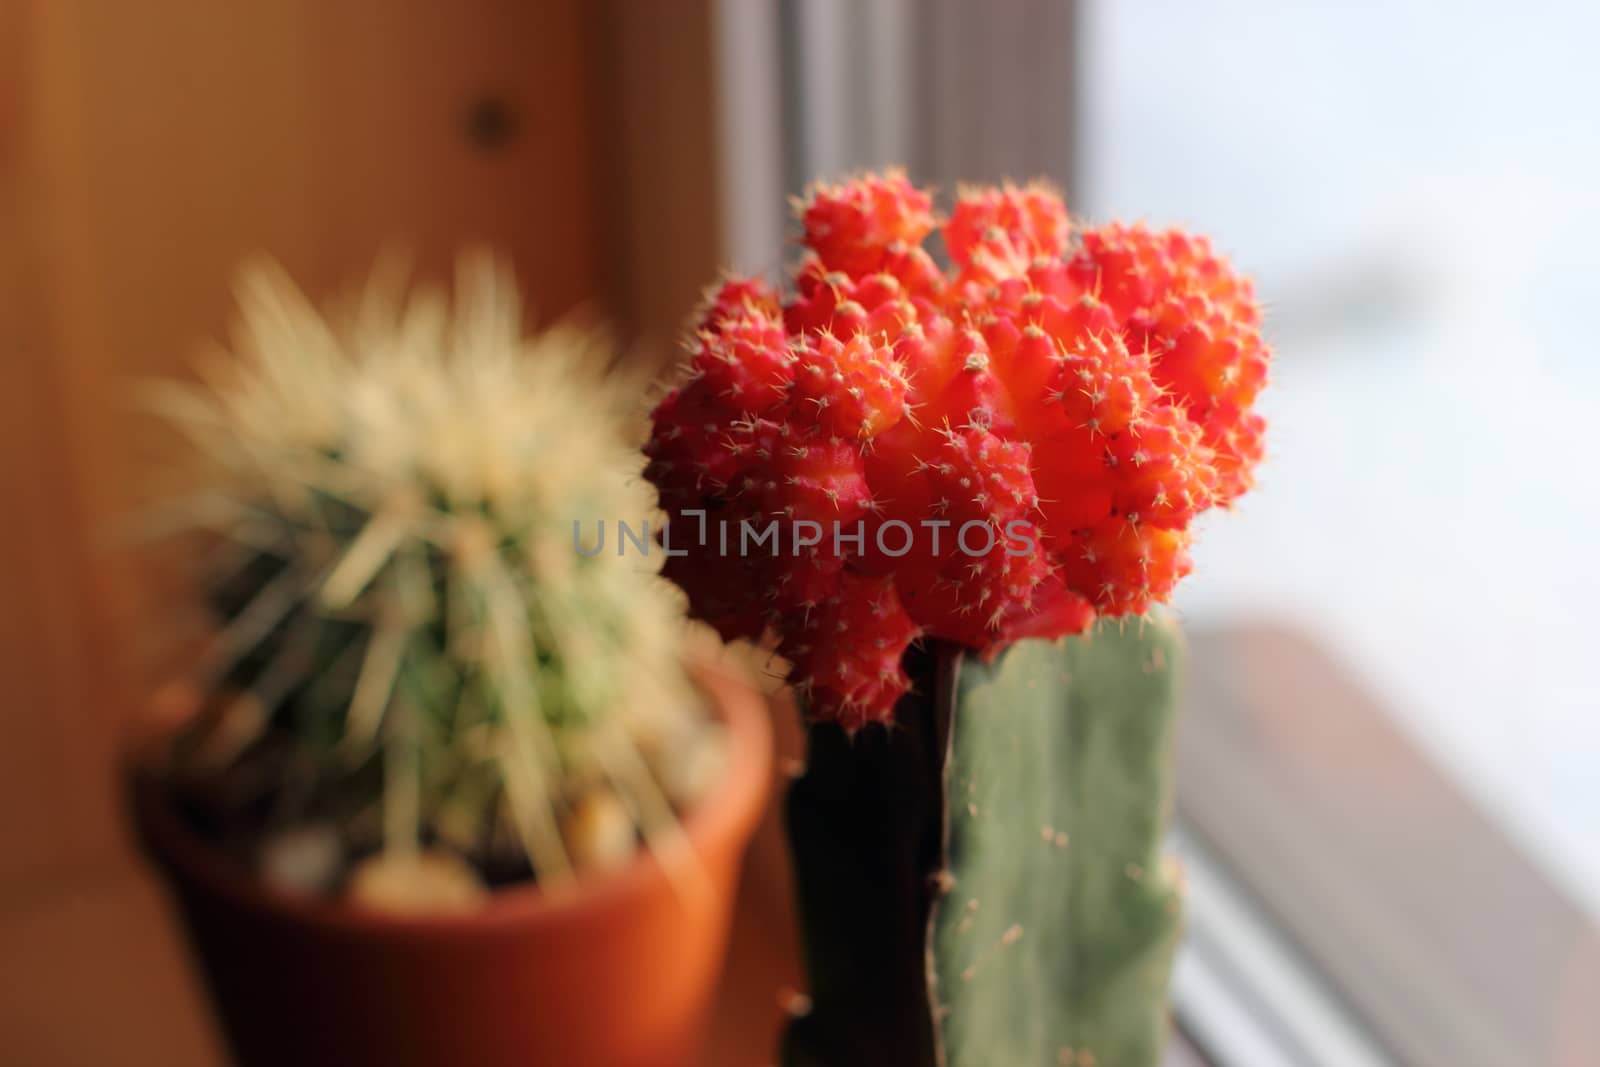 Cactus with red cap on the windowsill in a clay pot